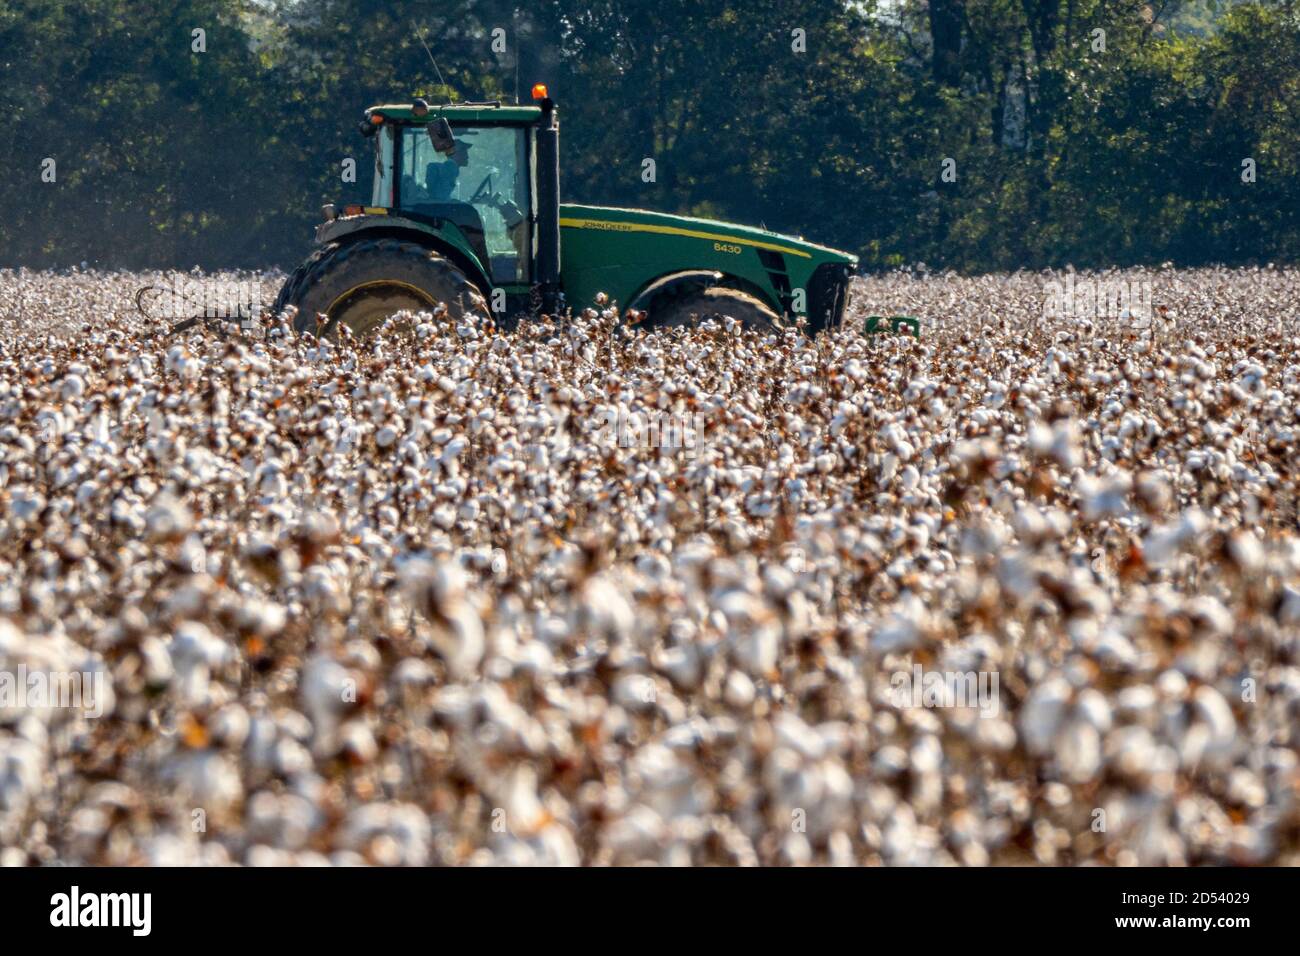 A John Deere tractor collects the cotton harvest during autumn at Pugh Farms plantation October 18, 2019 in Halls, Tennessee. Stock Photo